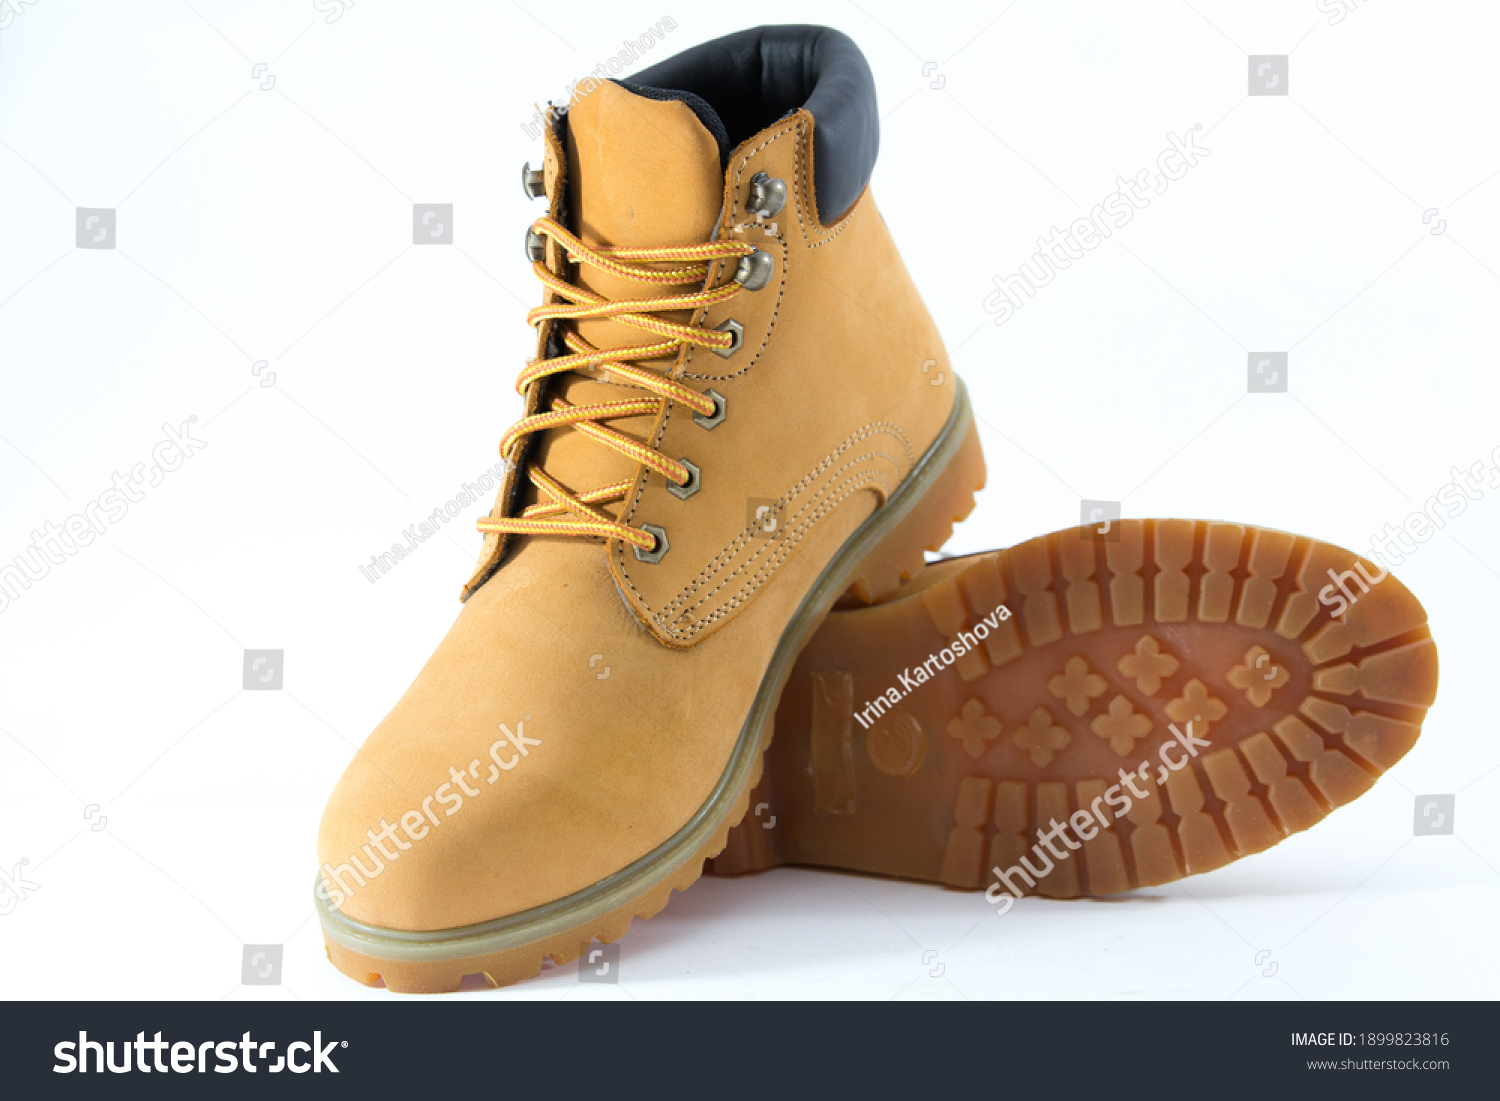 
Light brown leather shoes on a white background #1899823816